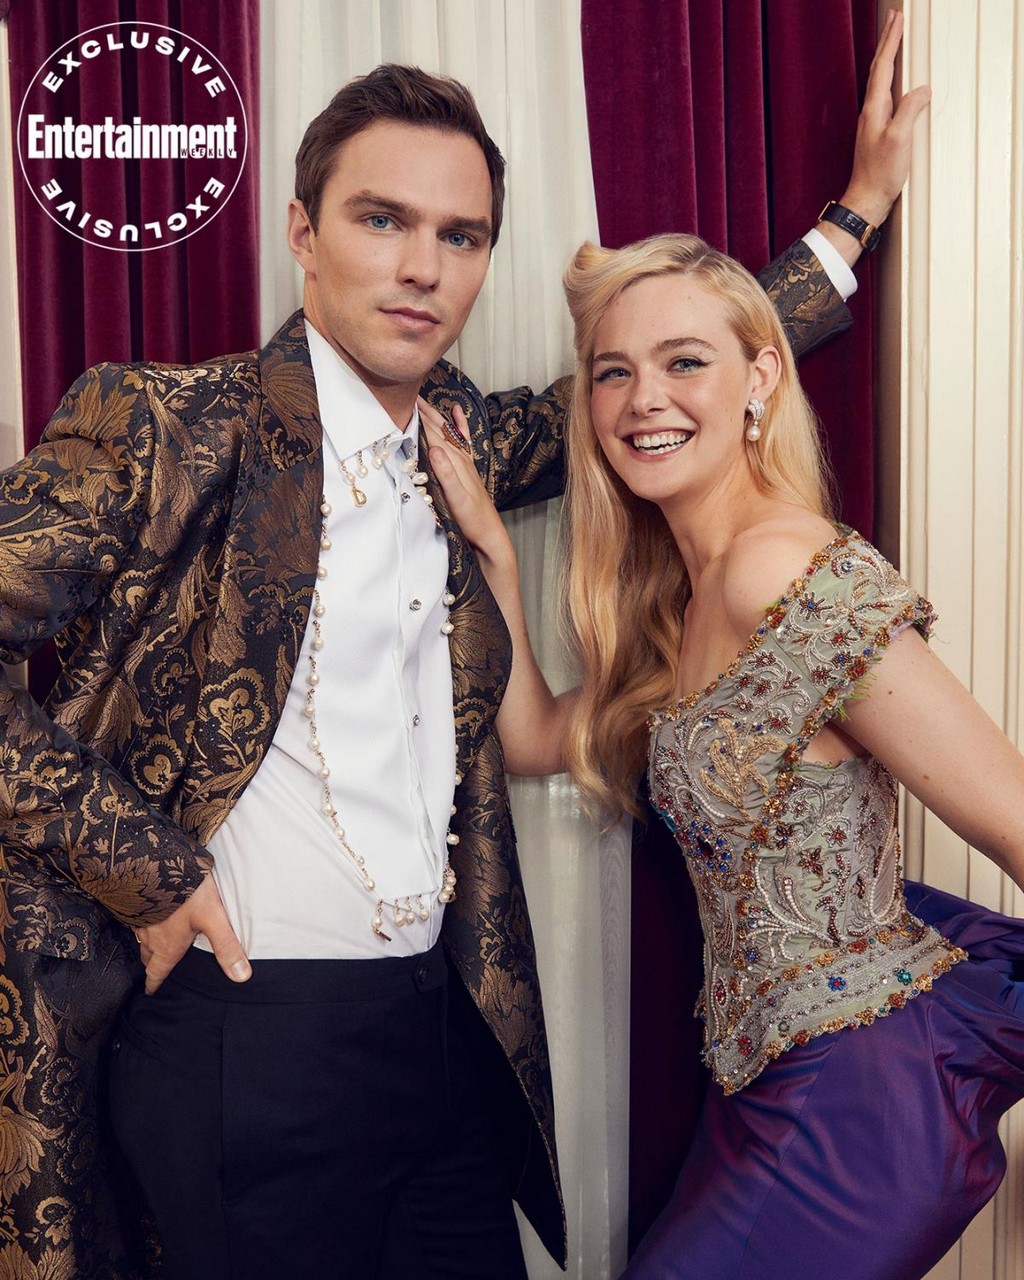 Elle Fanning For Entertainment Weekly November